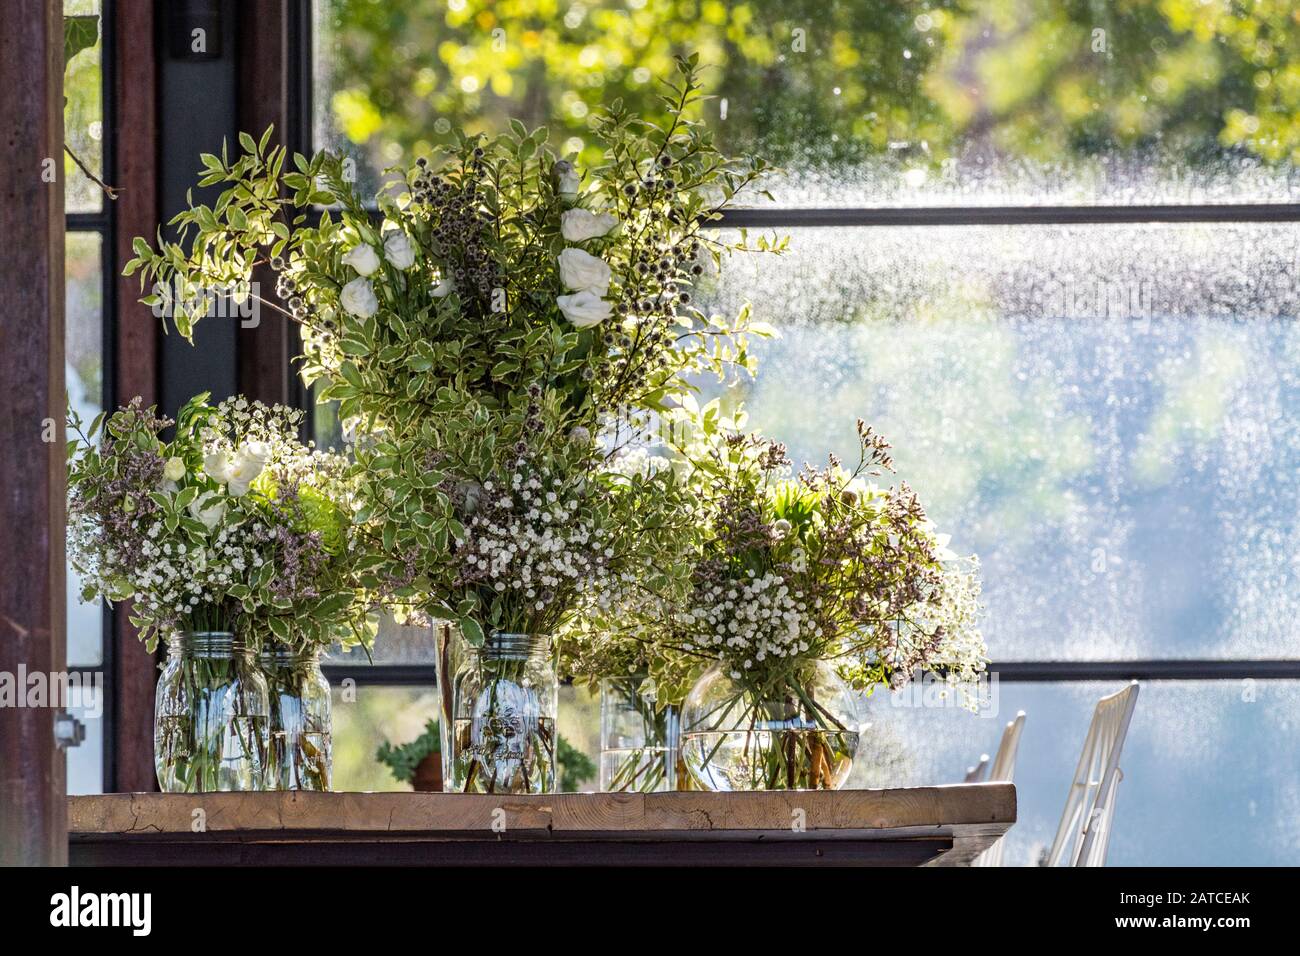 Vases filled with native Australian flowers Stock Photo